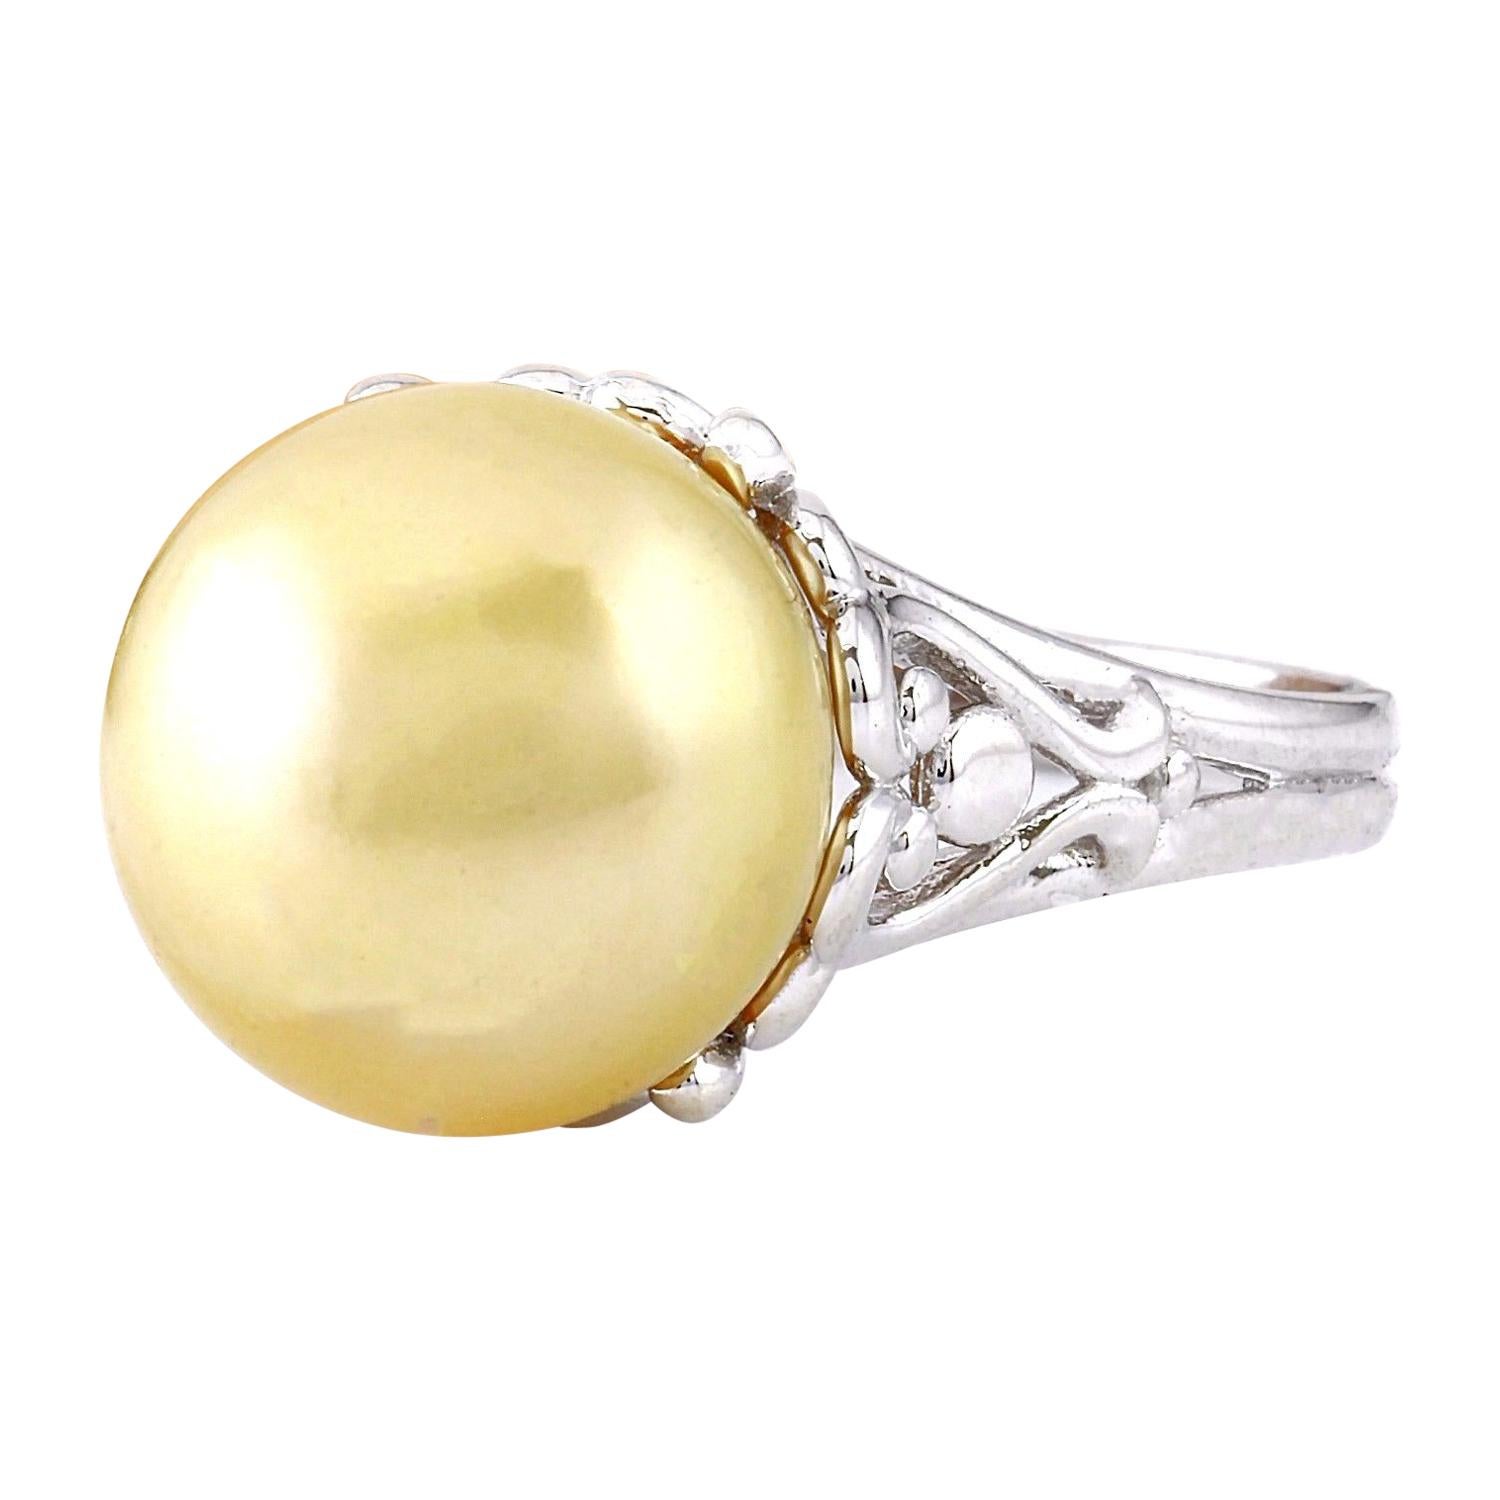 12.90 mm Gold South Sea Pearl 14K Solid White Gold Ring
 Item Type: Ring
 Item Style: Cocktail
 Material: 14K White Gold
 Mainstone: South Sea Pearl
 Stone Color: Gold
 Stone Shape: Round
 Stone Quantity: 1
 Stone Dimensions: 12.90x12.90 mm
 Stone